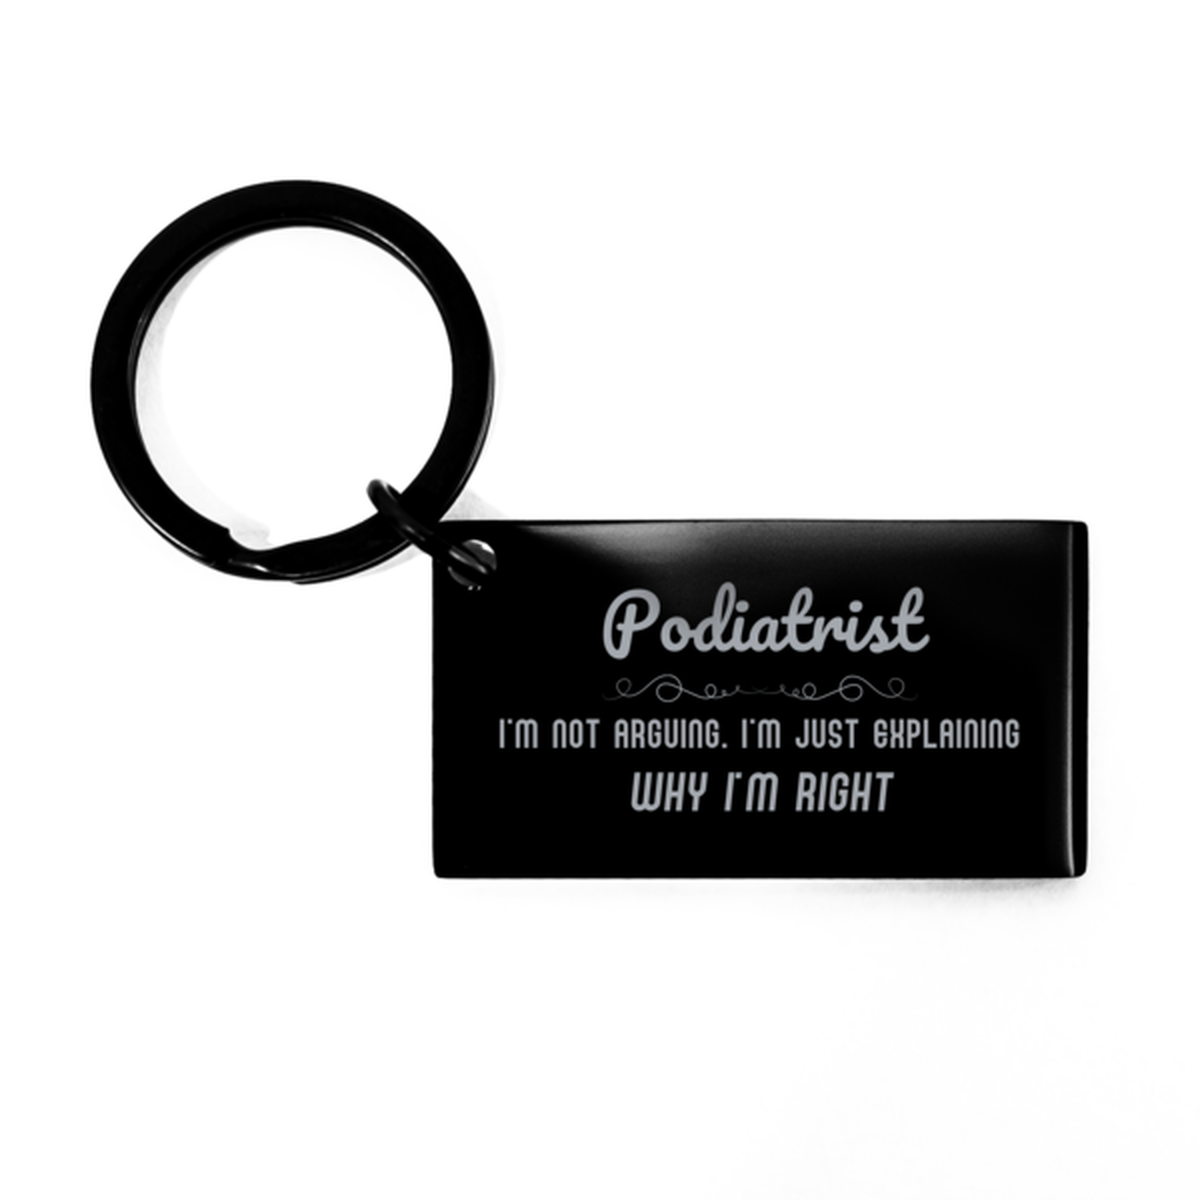 Podiatrist I'm not Arguing. I'm Just Explaining Why I'm RIGHT Keychain, Funny Saying Quote Podiatrist Gifts For Podiatrist Graduation Birthday Christmas Gifts for Men Women Coworker